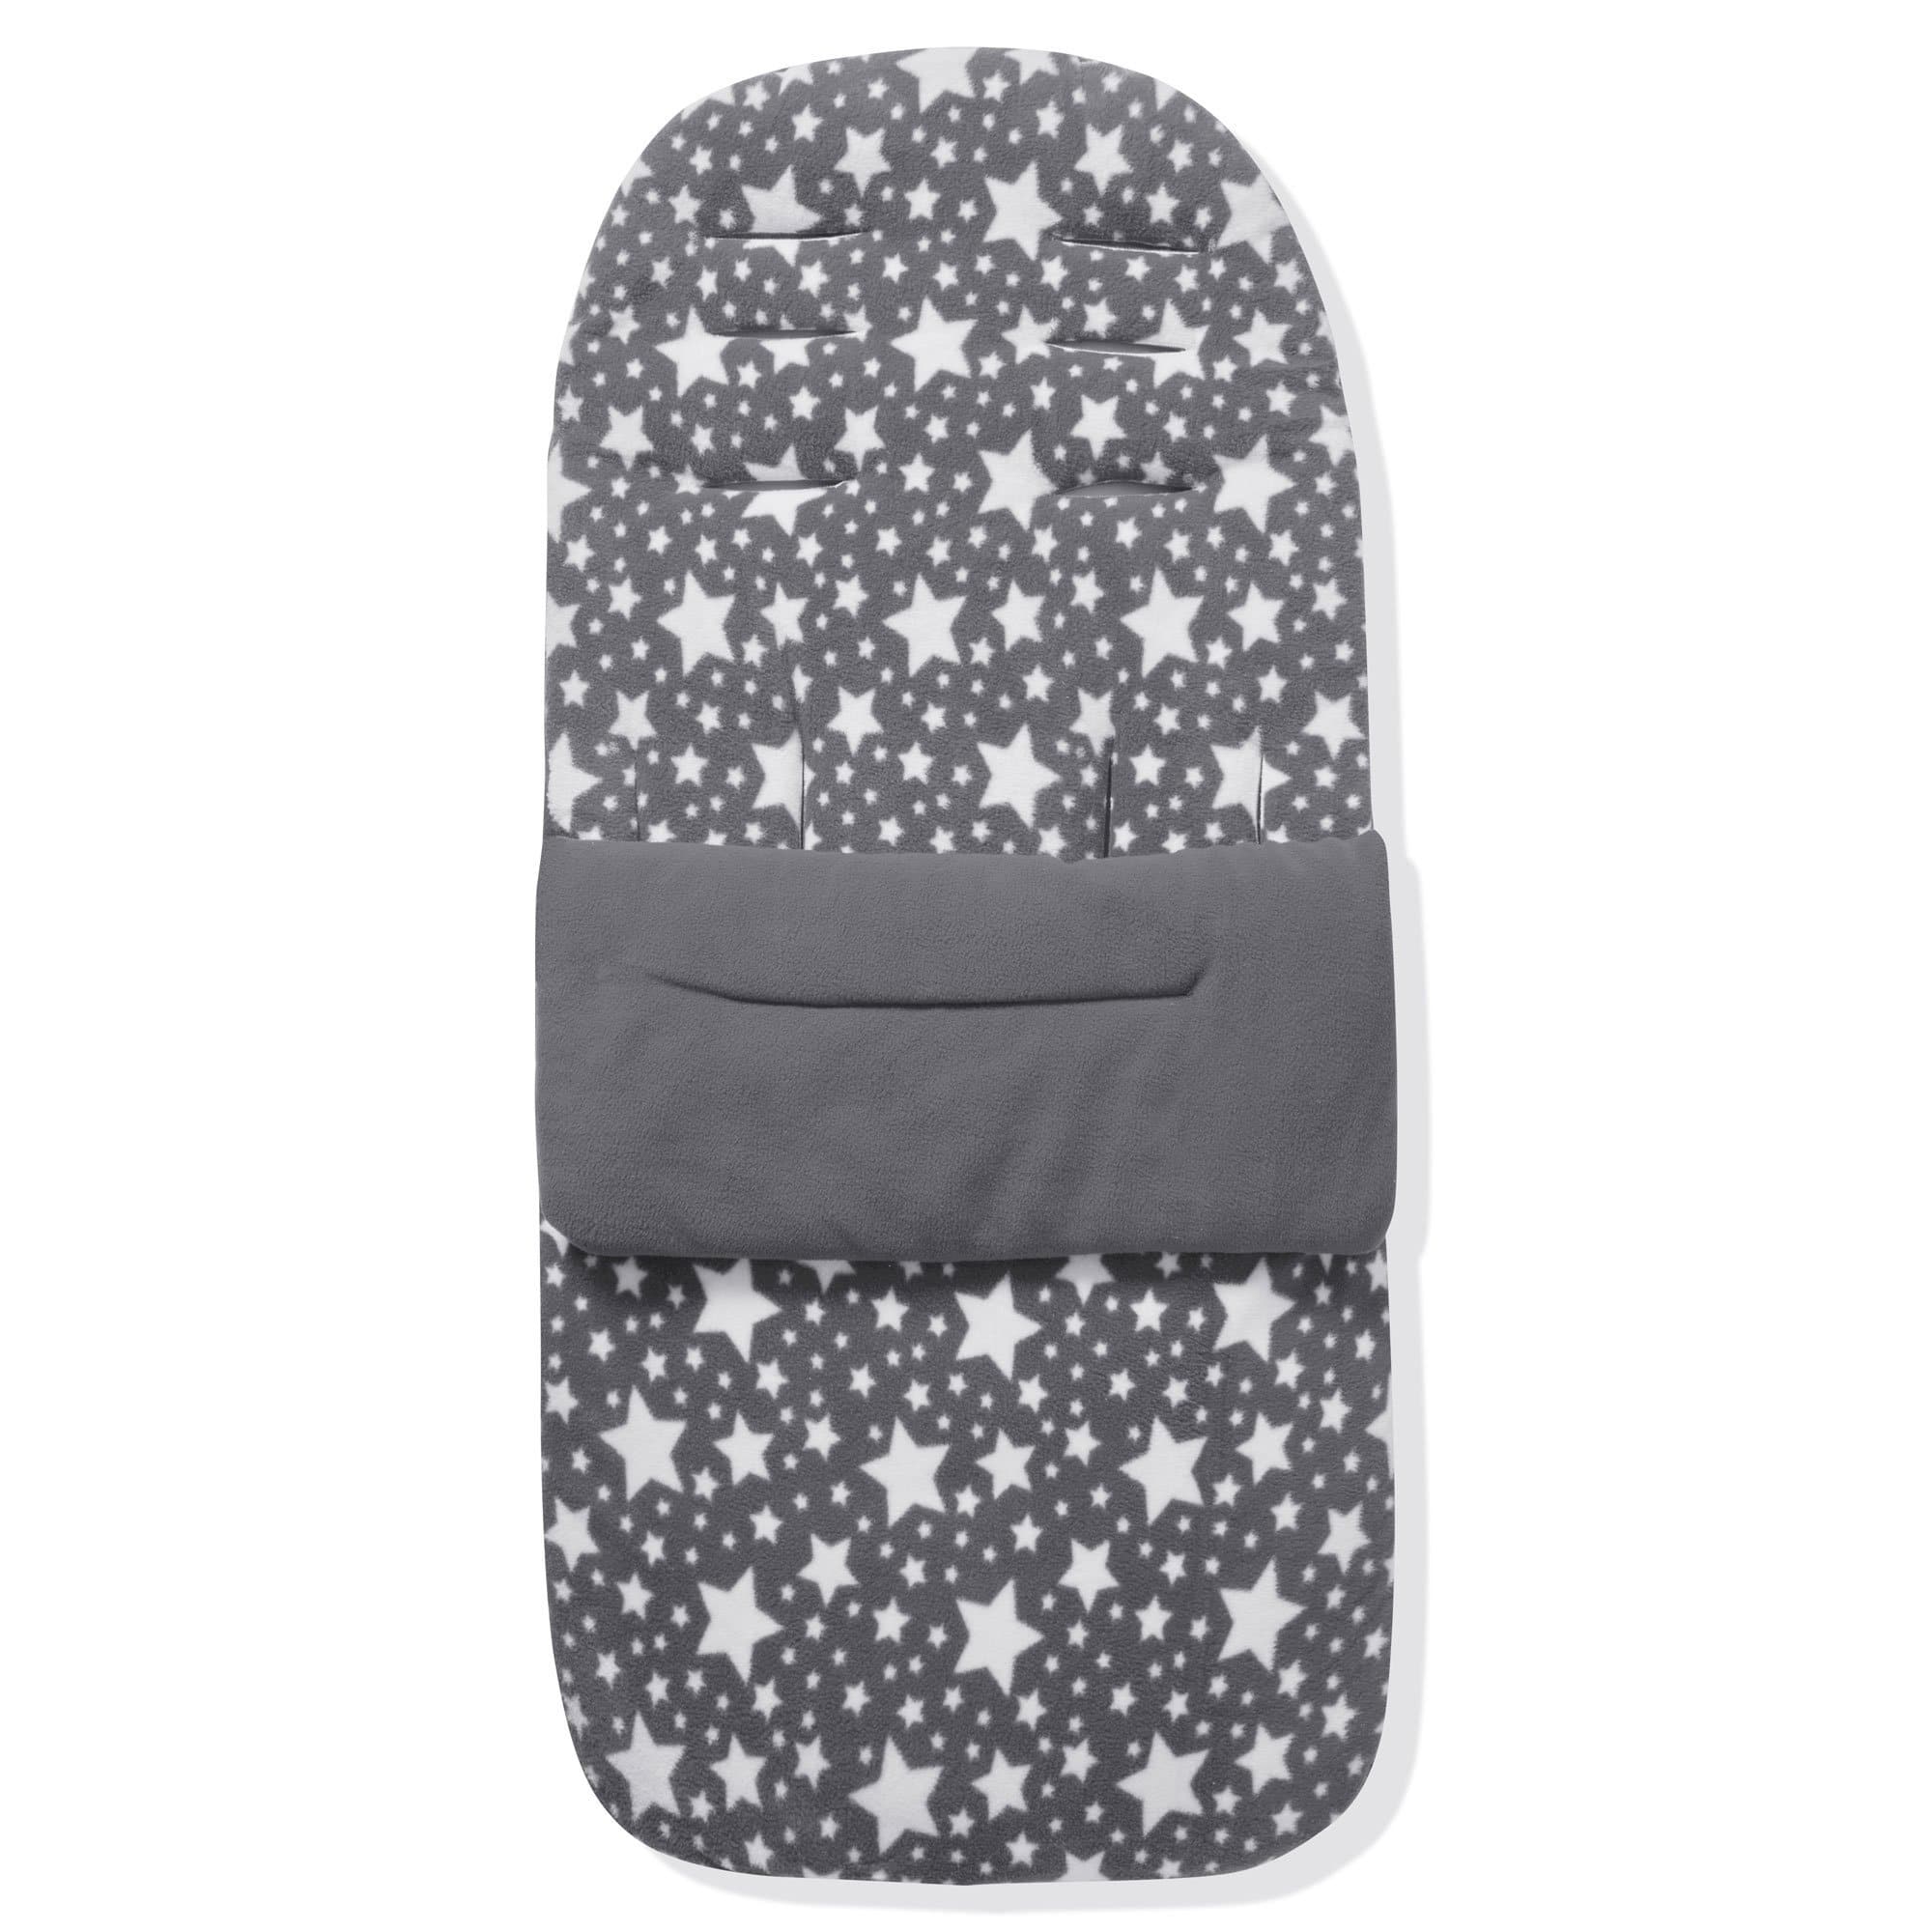 Fleece Footmuff / Cosy Toes Compatible with Greentom - Grey Star / Fits All Models | For Your Little One